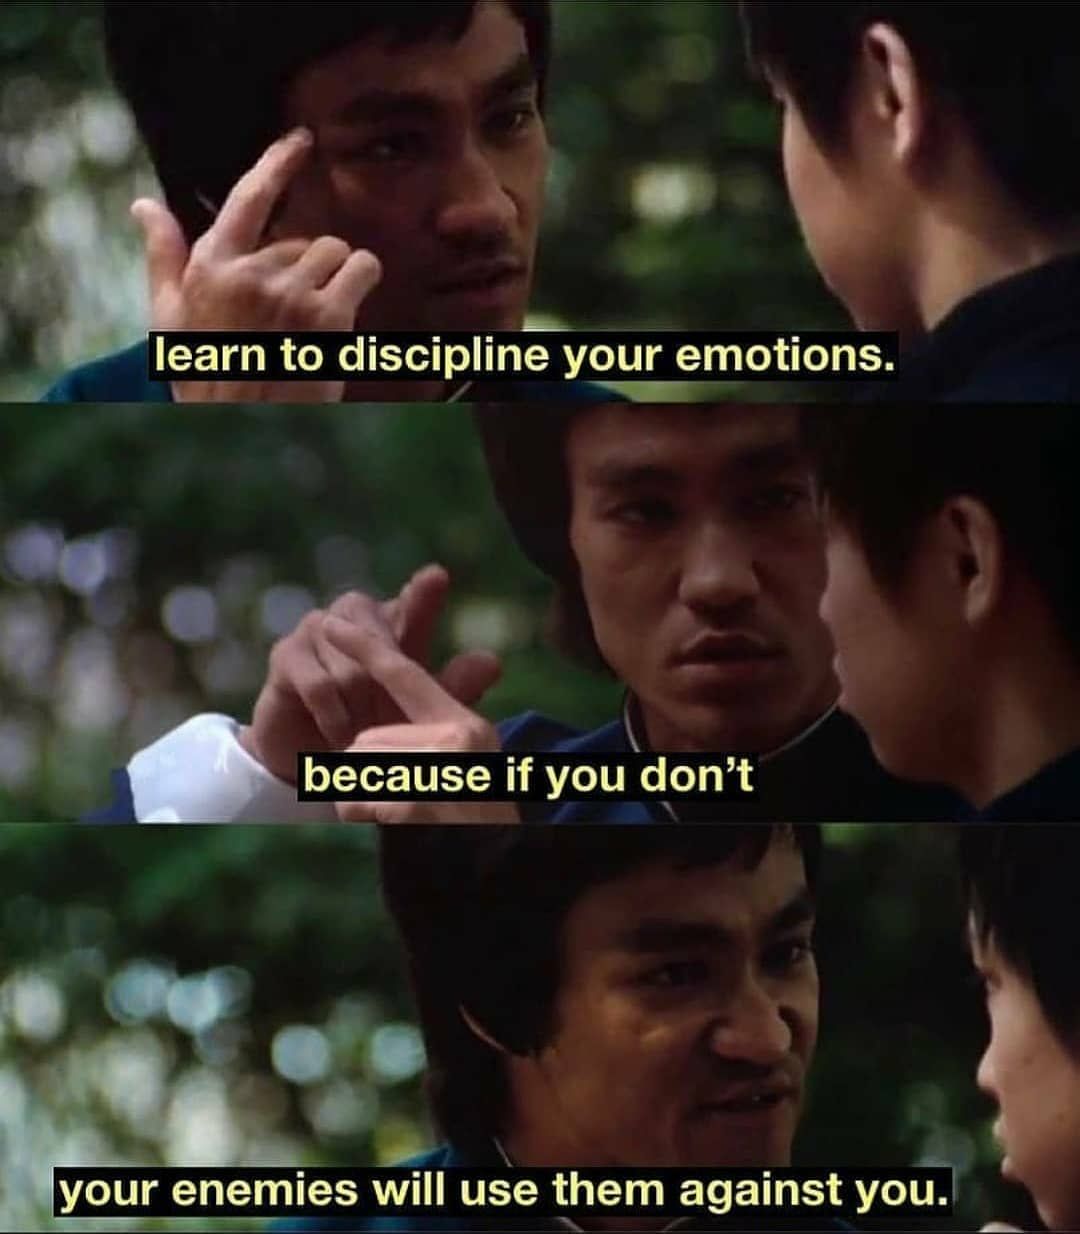 366017-Learn-To-Discipline-Your-Emotions.jpg